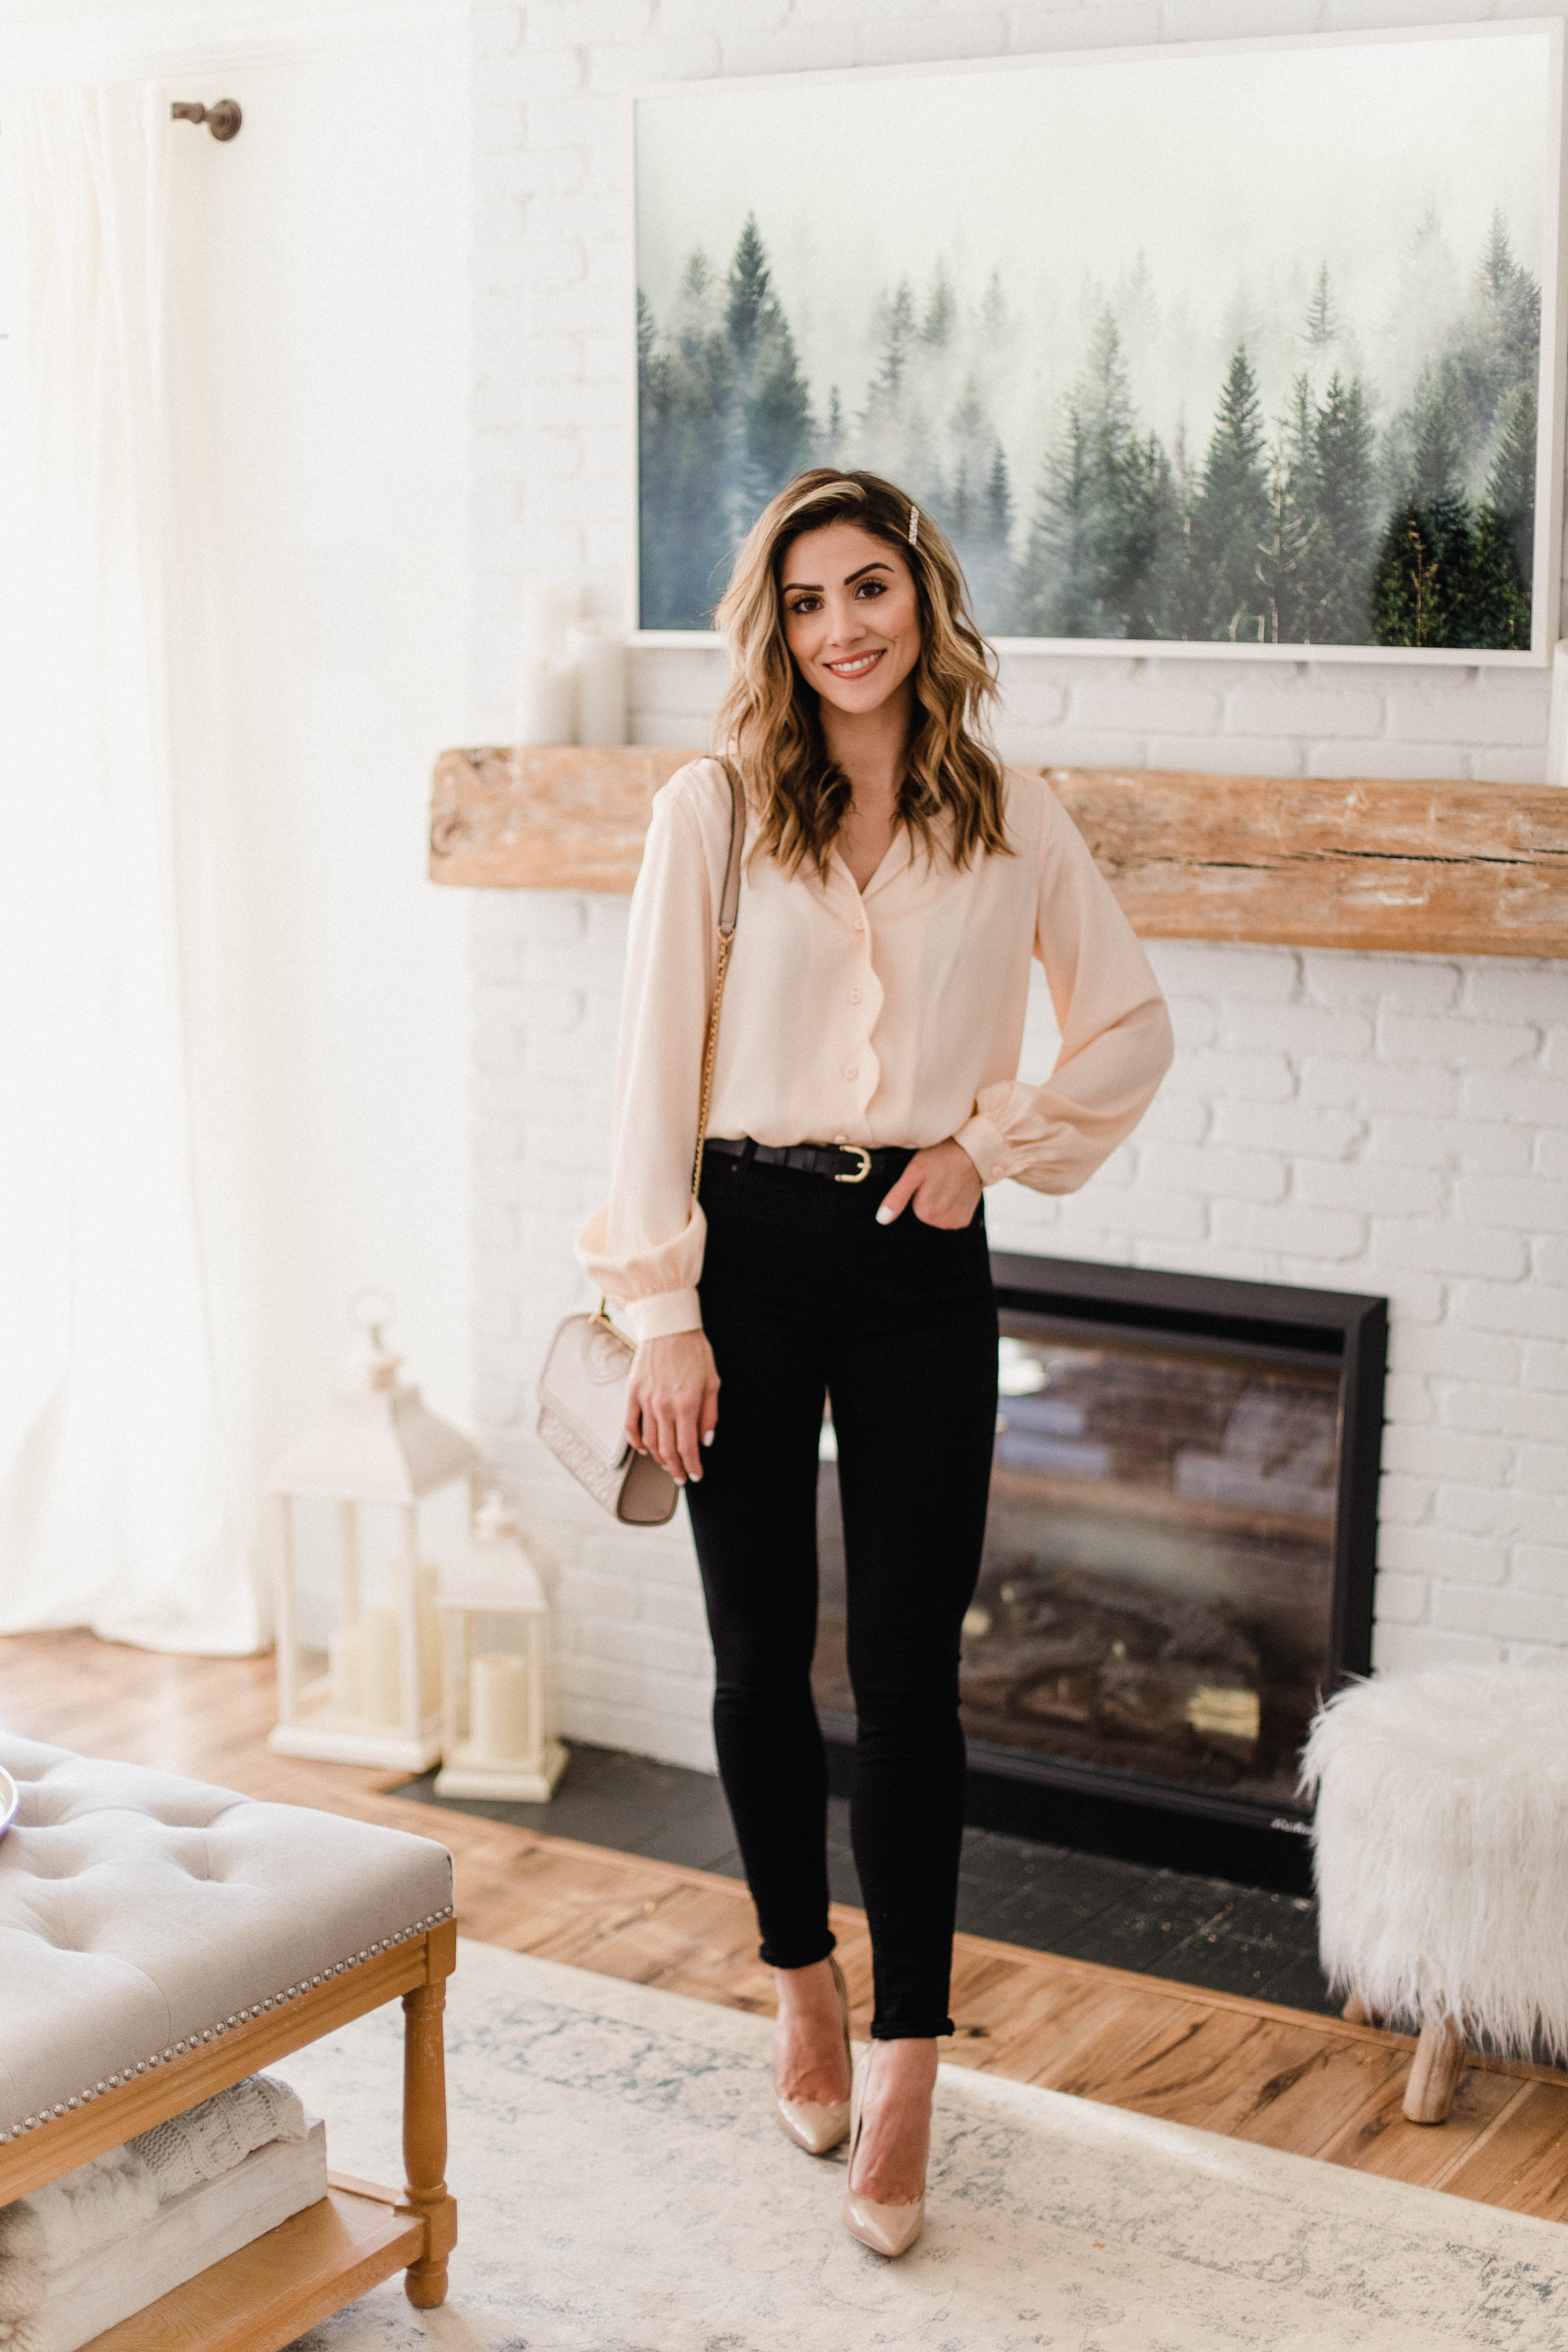 Connecticut life and style blogger Lauren McBride shares two Valentine's Day Date Night Outfit Ideas featuring a dressy and more casual look.